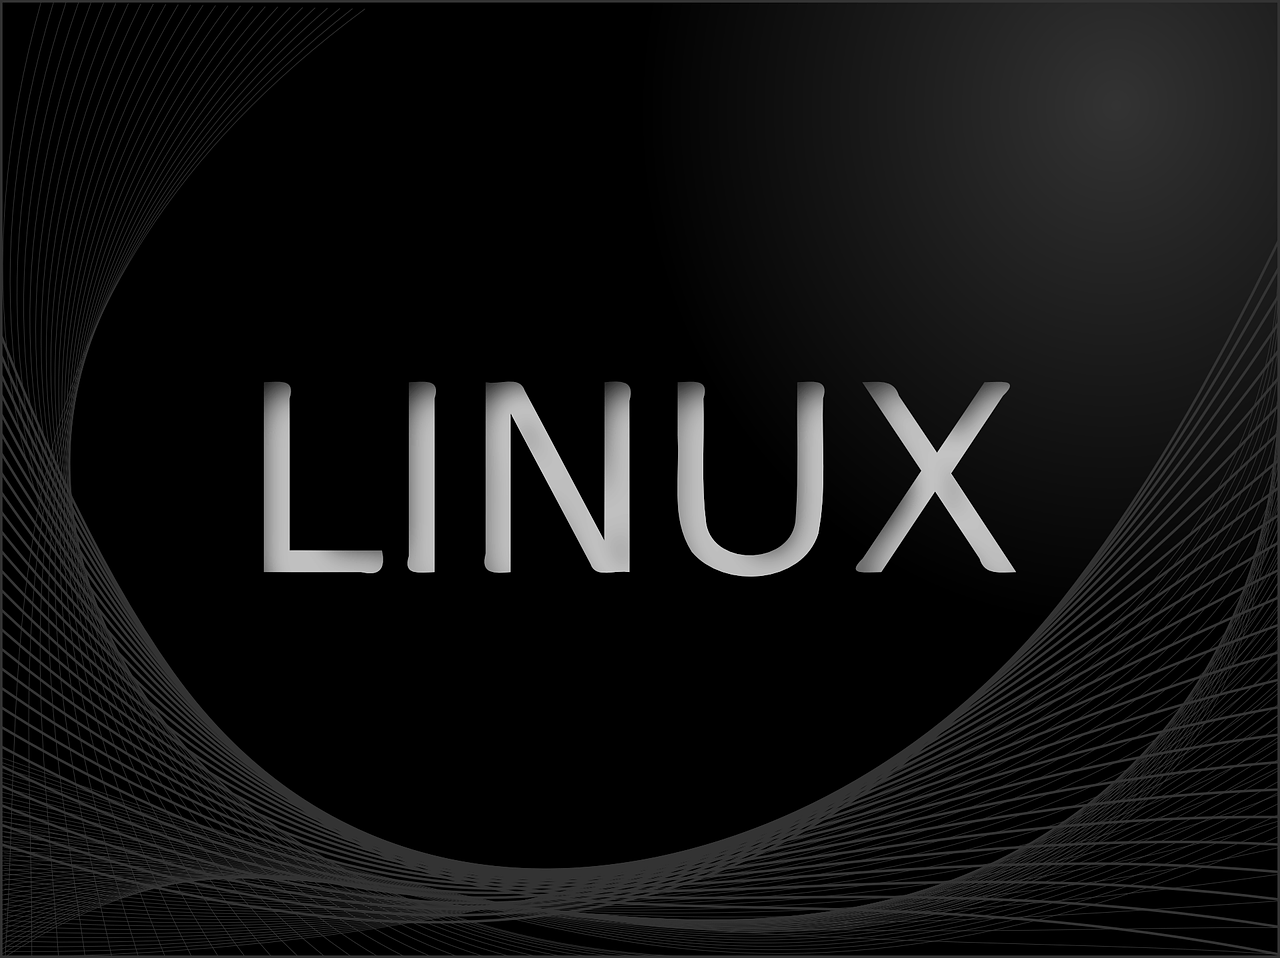 linux wallpaper text free photo